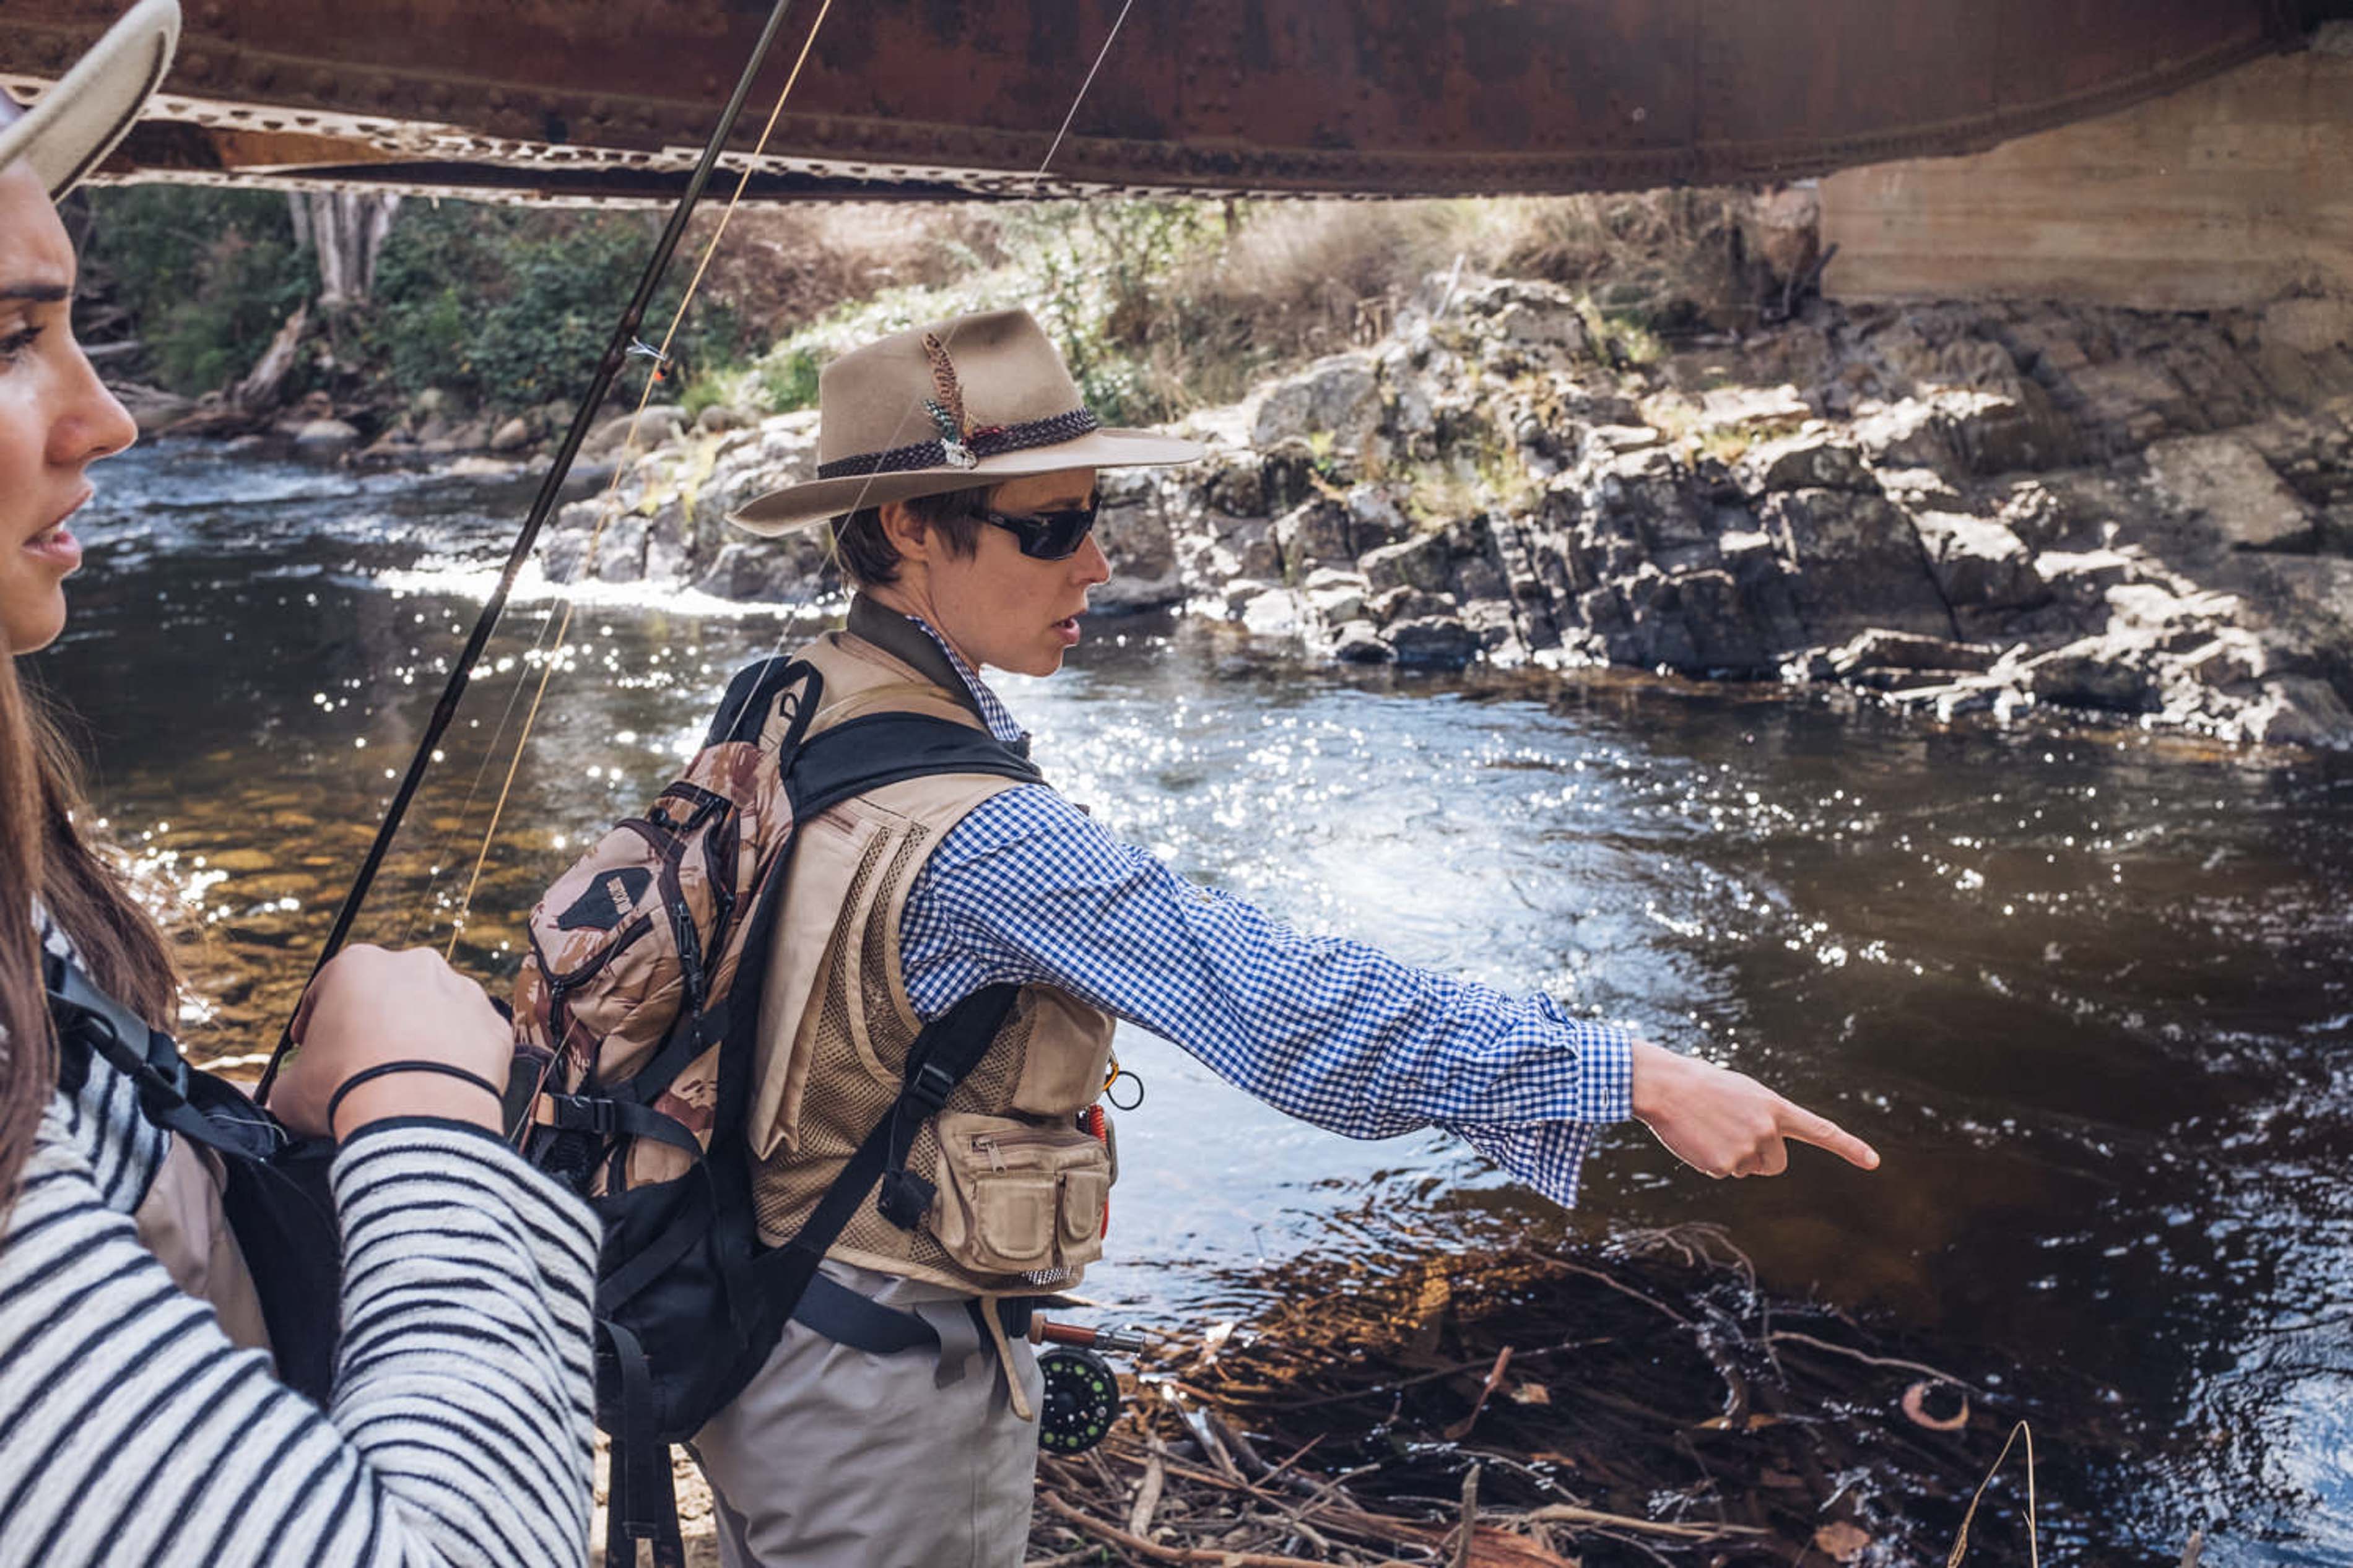 The fly fisher who wants more women out on the water